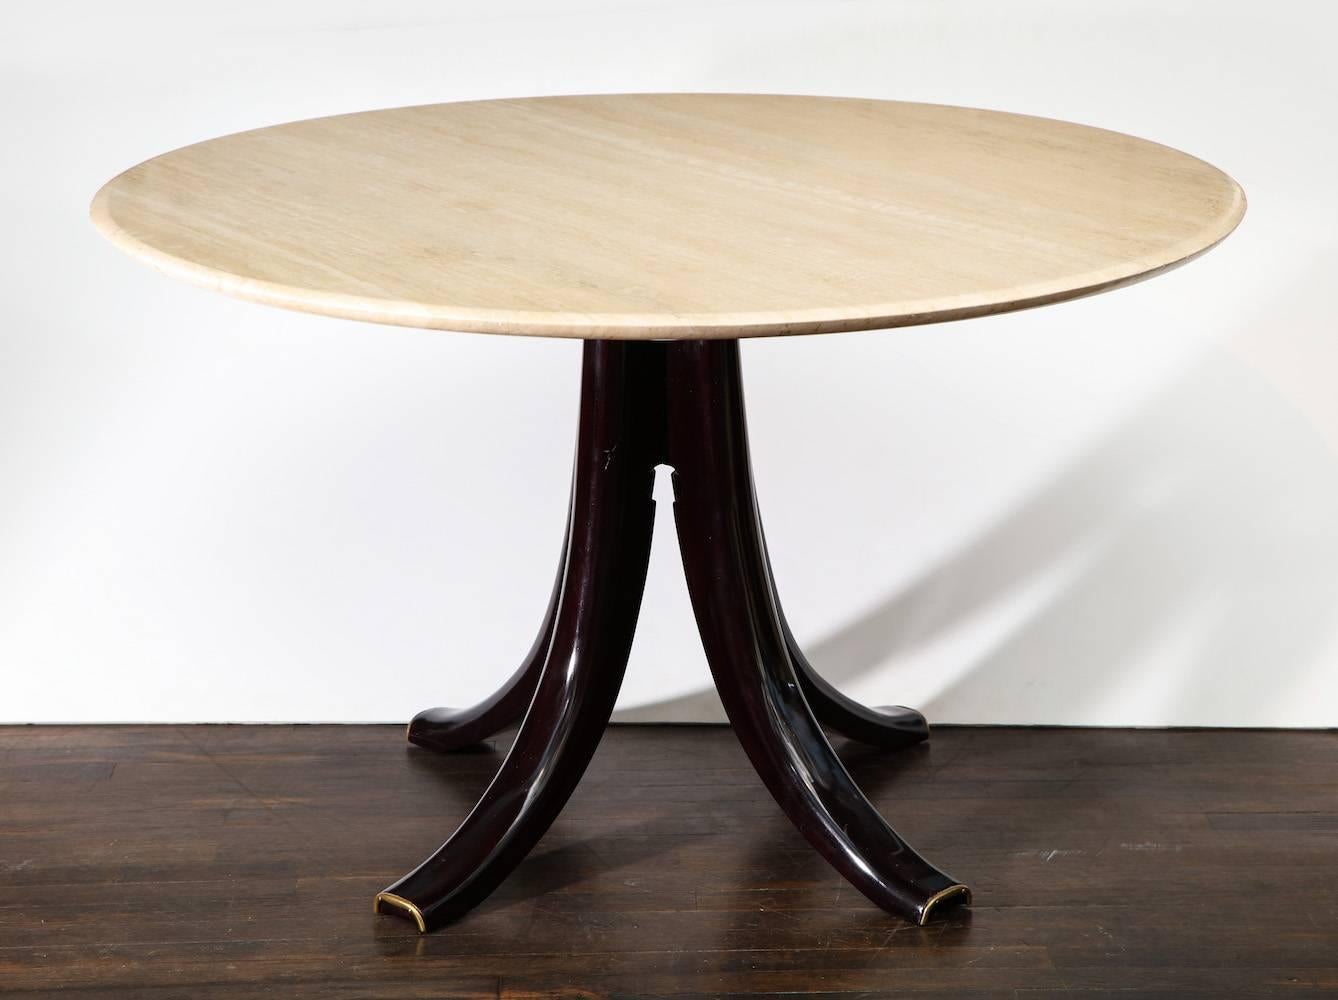 Circular center or dining table by Osvaldo Borsani.
Dark-stained wood base with brass mounts and travertine top. Certificate of Authenticity from Archivio Osvaldo Borsani.